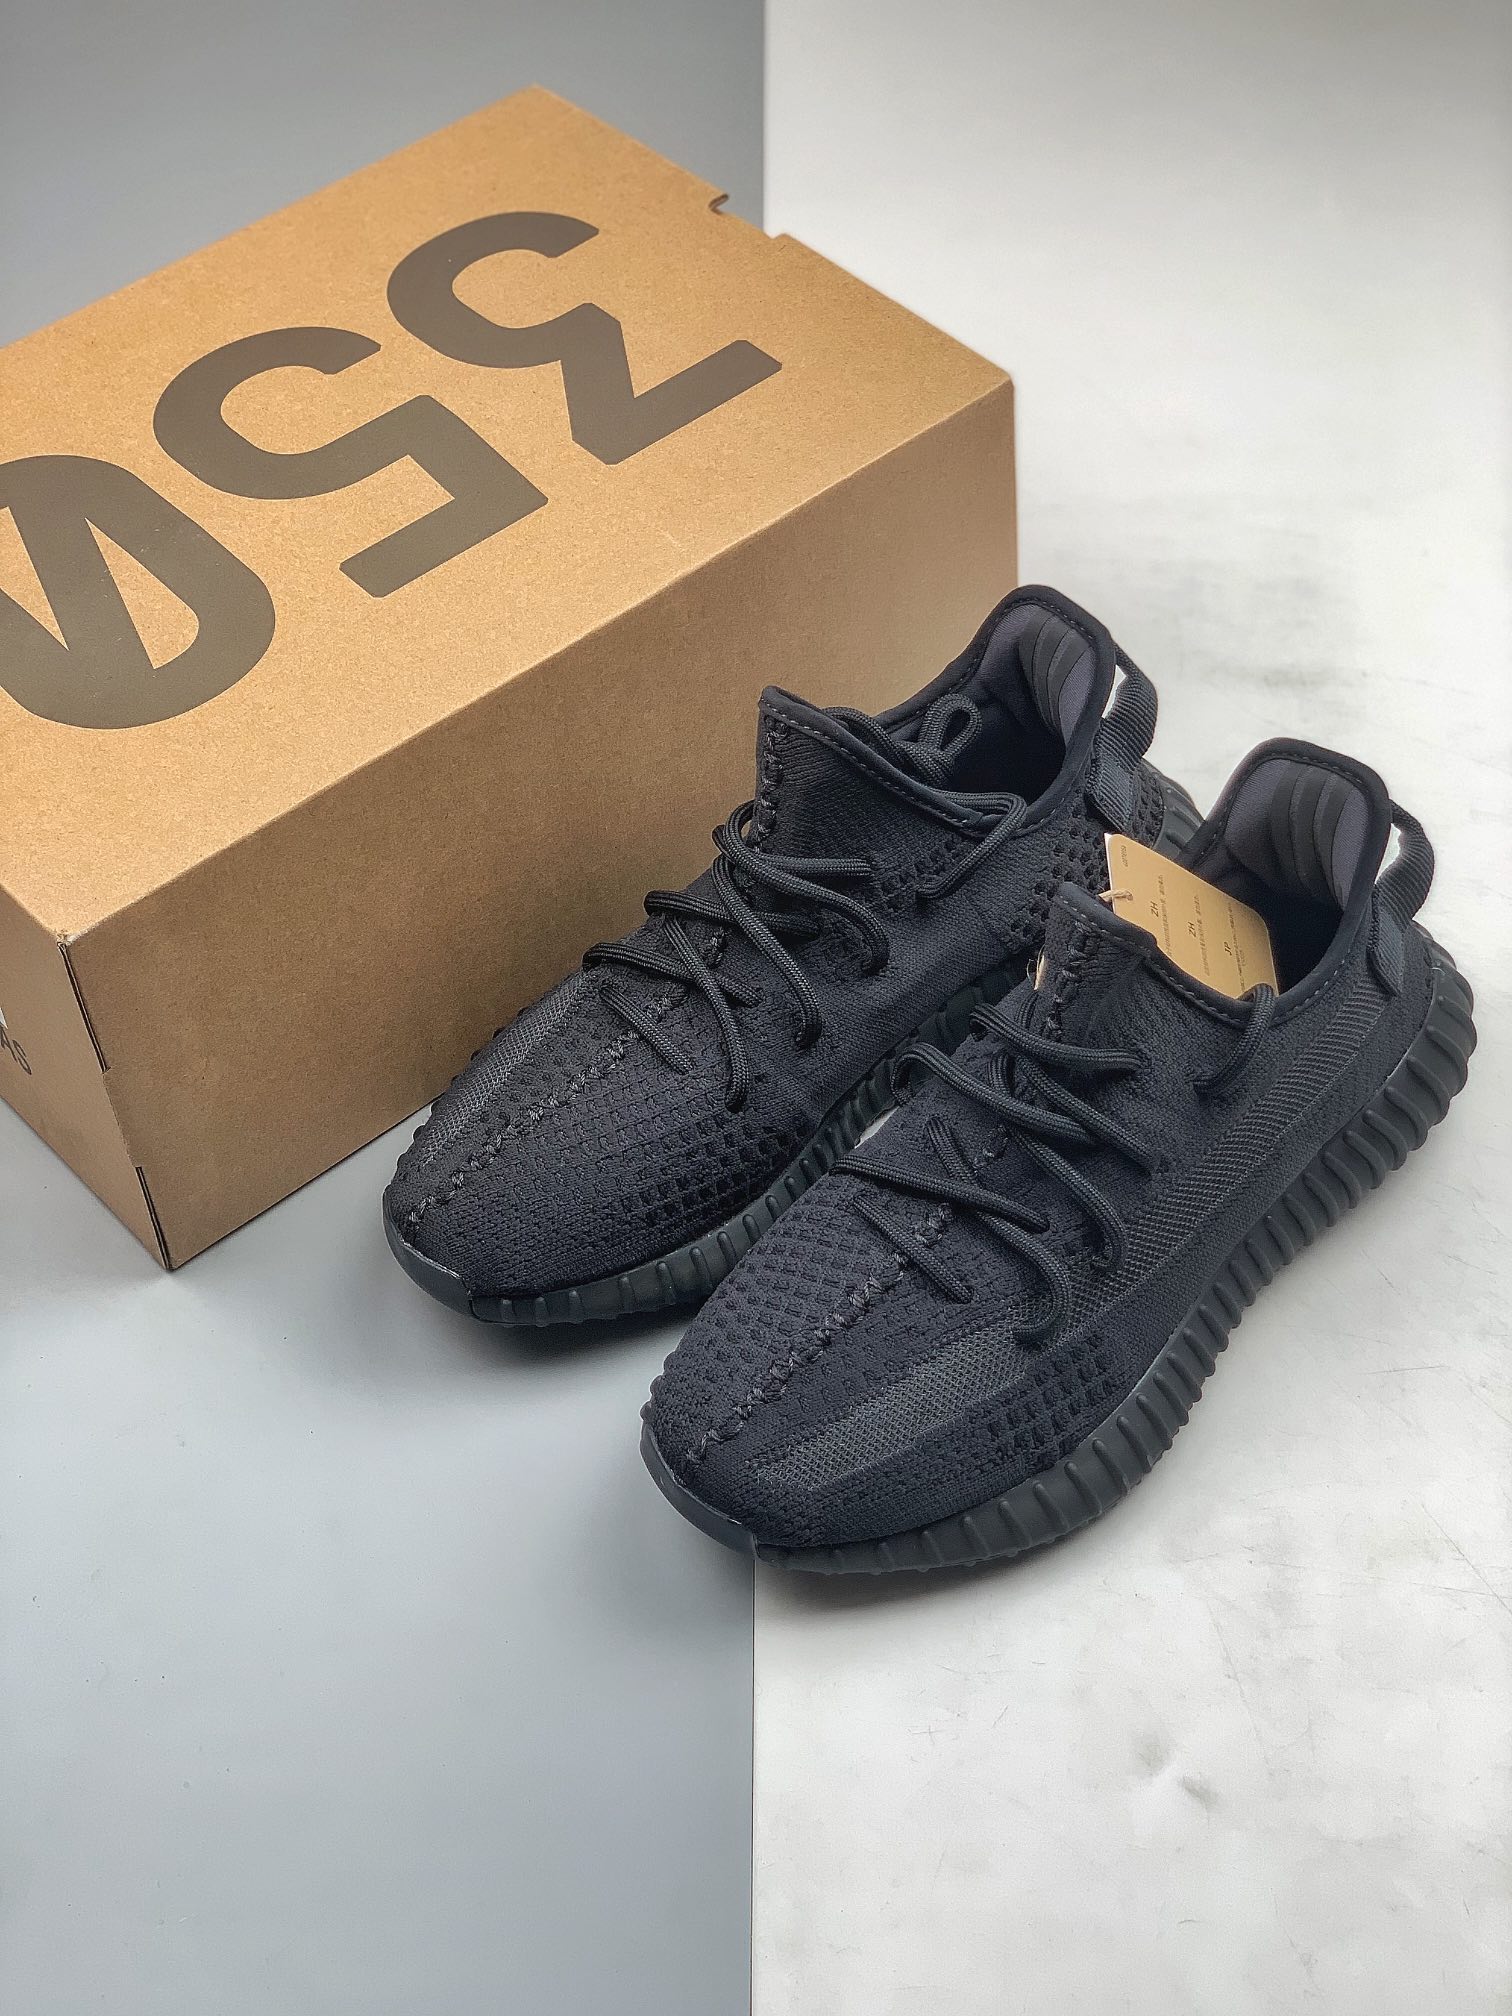 Adidas Yeezy Boost 350 V2 Cinder FY2903 - Shop the Latest Sneaker Releases